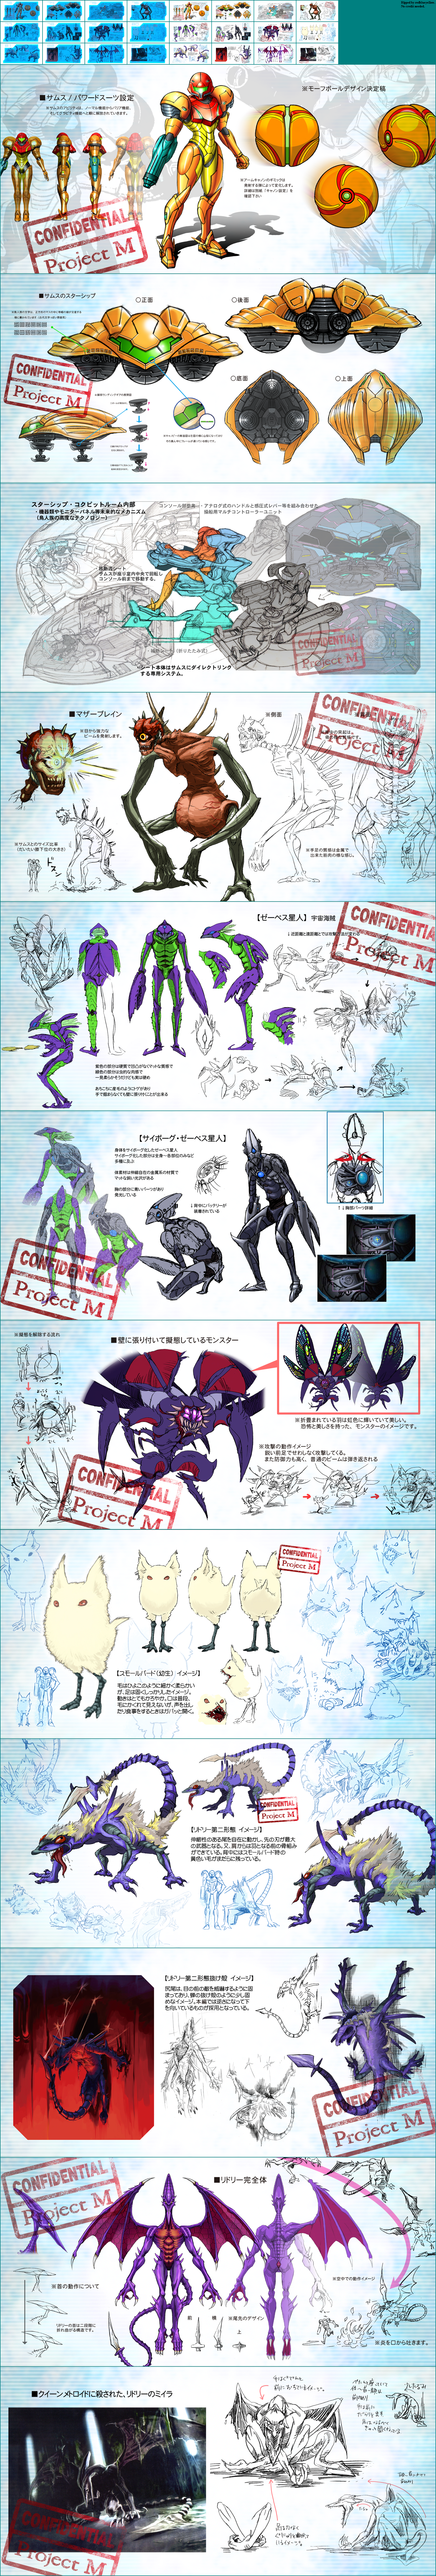 Metroid: Other M - Gallery (Page 7)